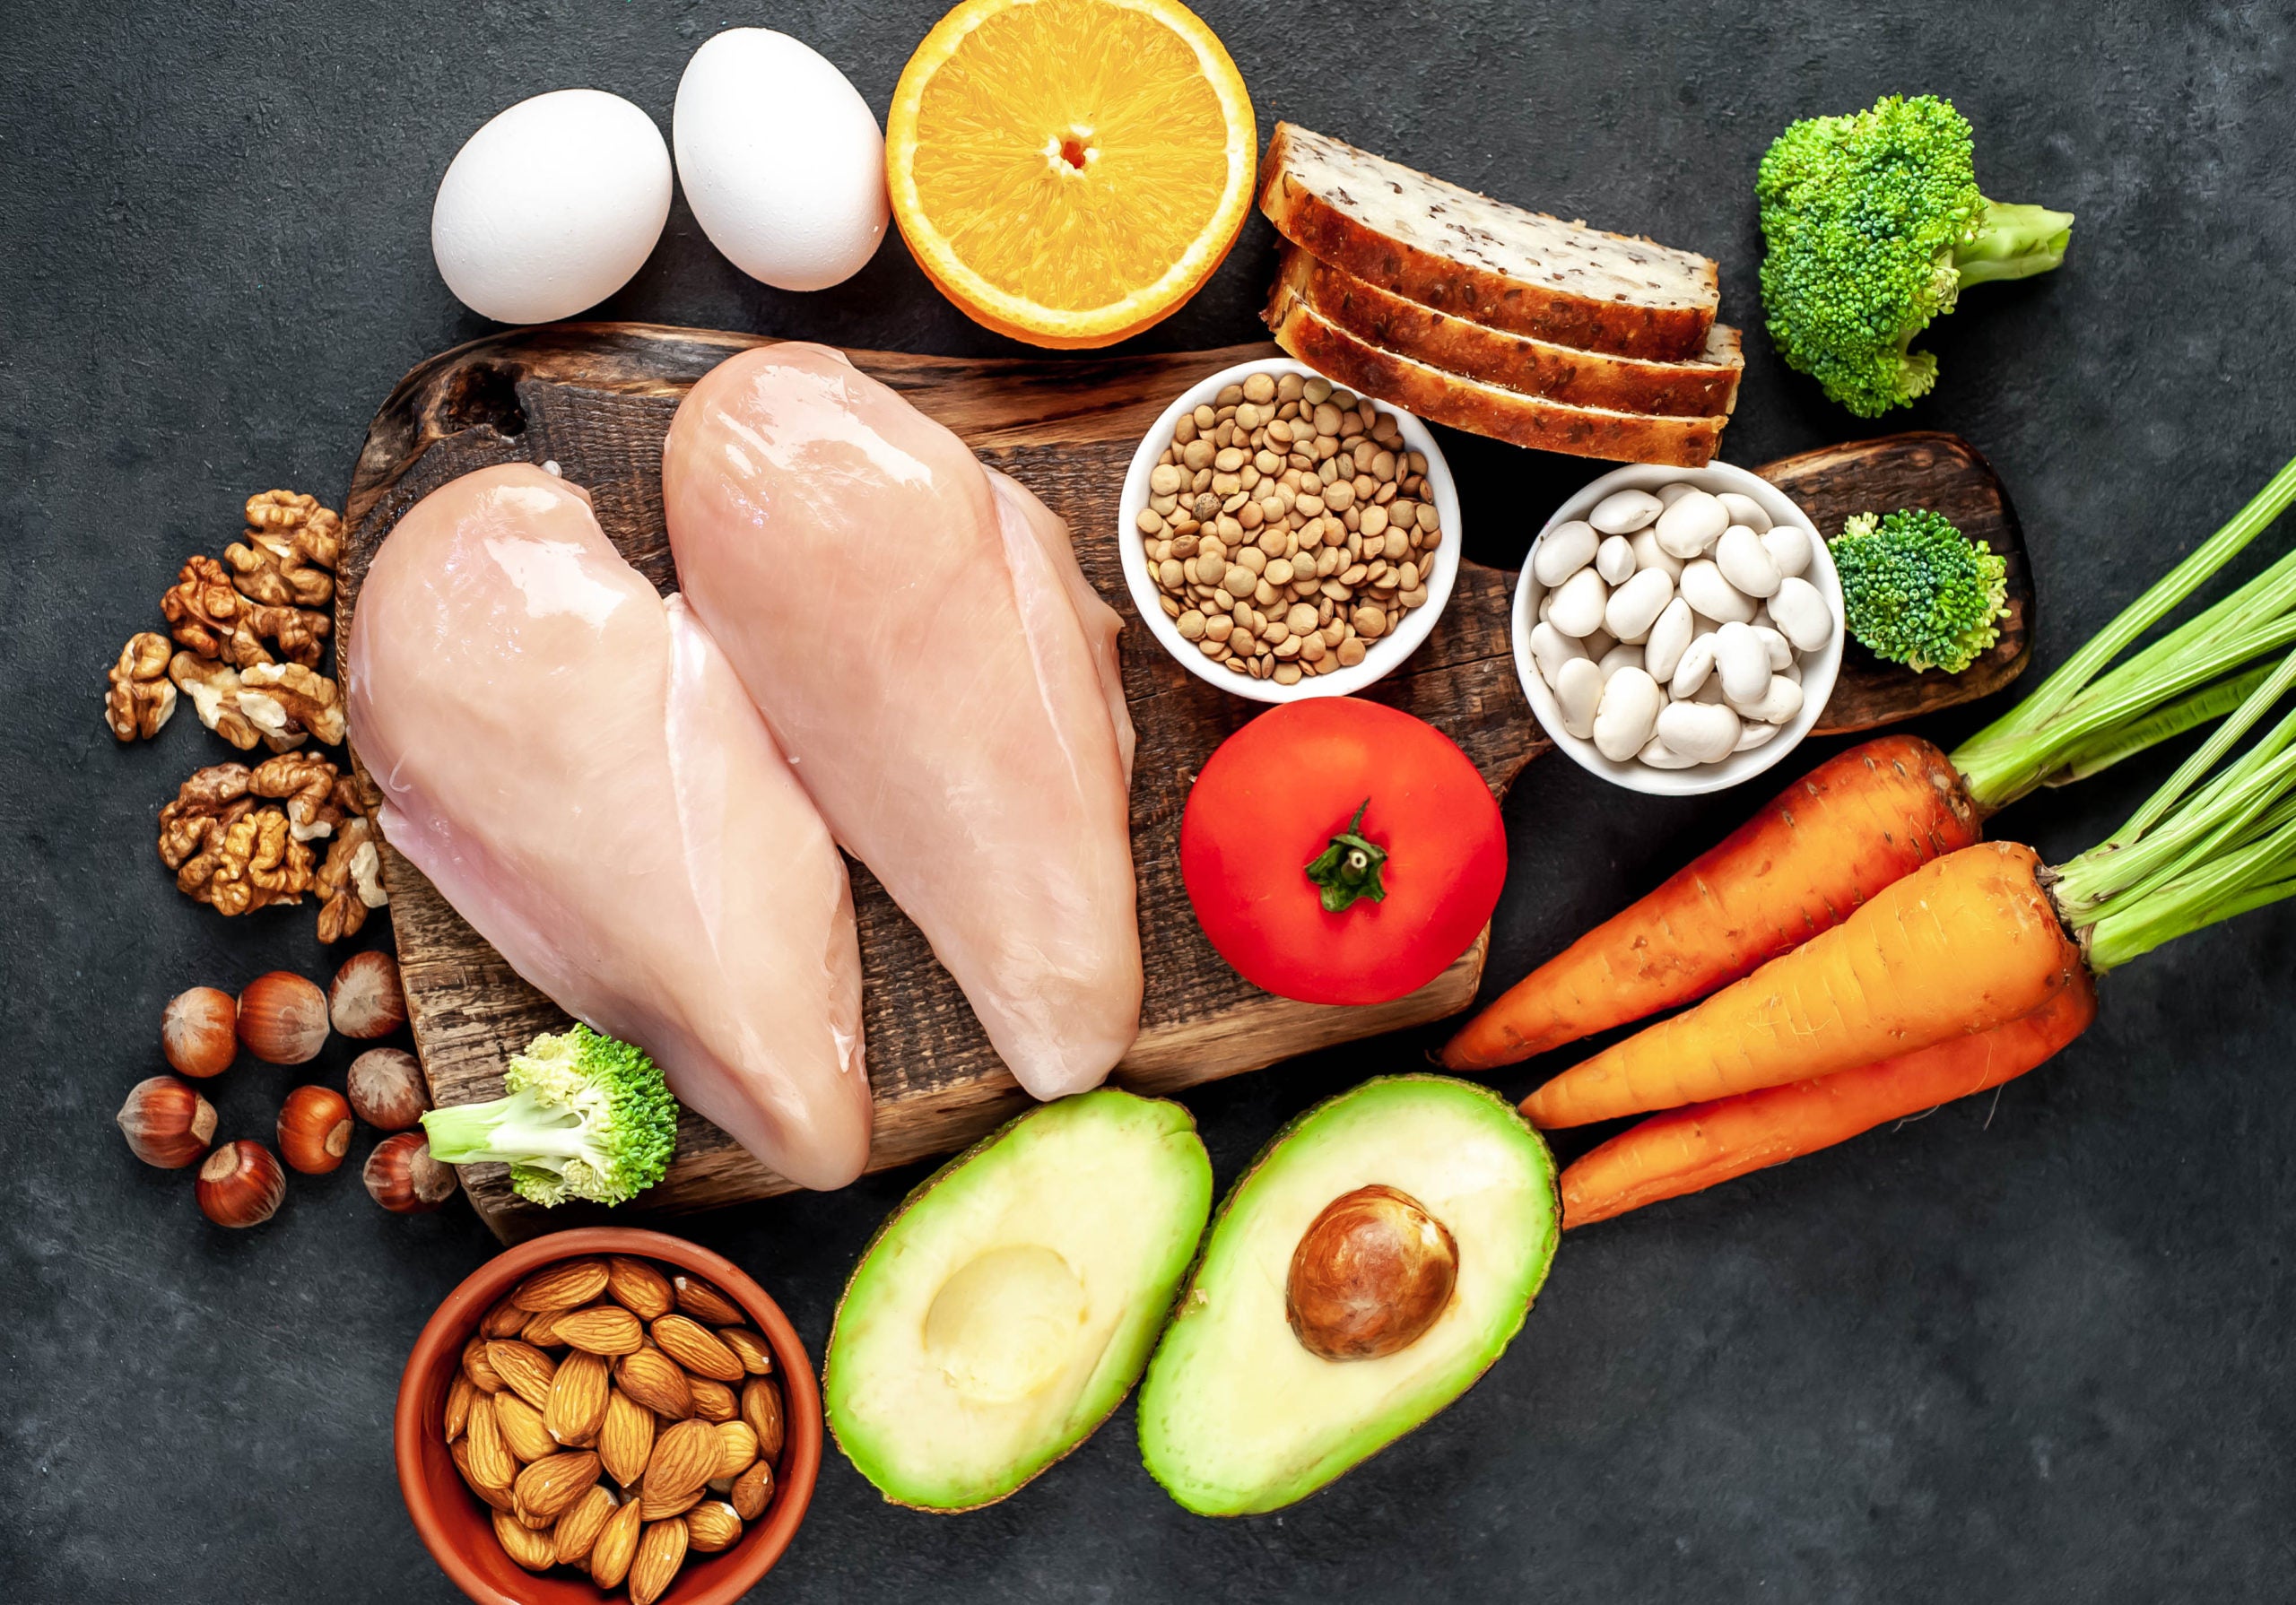 A range of foods high in Niacin (or Vitamin B3) including legumes, nuts, seeds, carrots, chicken, avocado, eggs, grains, broccoli